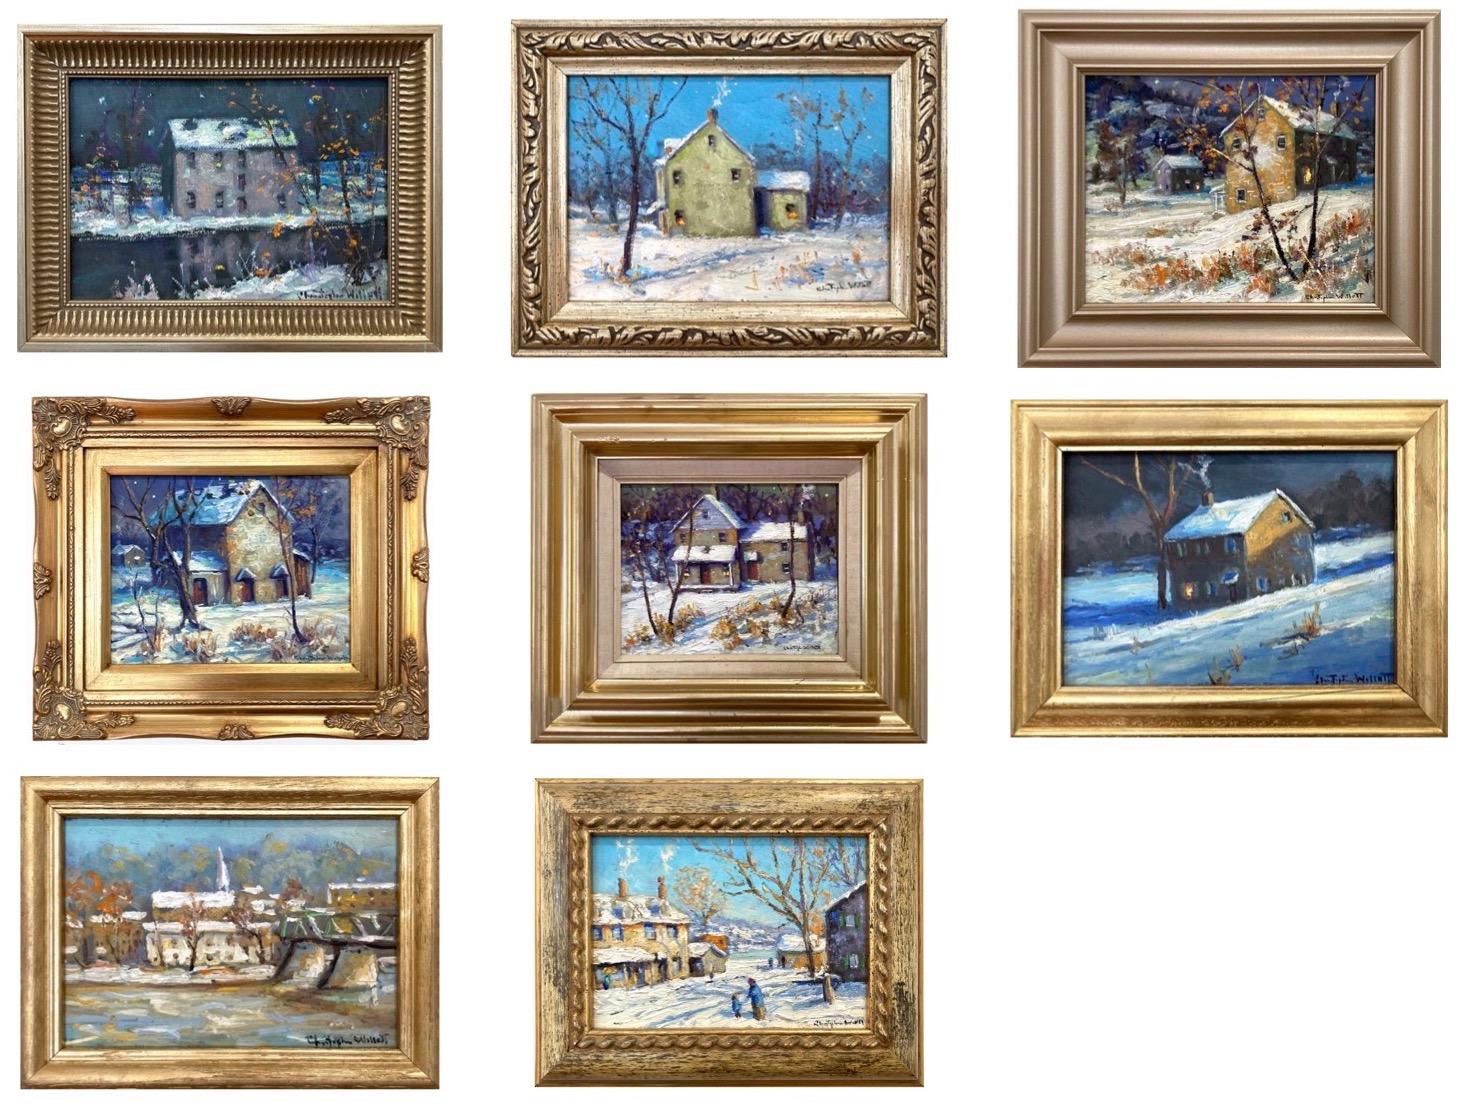 This listing is including 7 Impressionist pastoral works by Christopher Willett as follow:

"Mill on New Hope" Art measures 5 x 7 inches, Frame measures 6.5 x 8.5 inches
"House in Buckingham" Art measures 5 x 7 inches, Frame measures 7 x 9